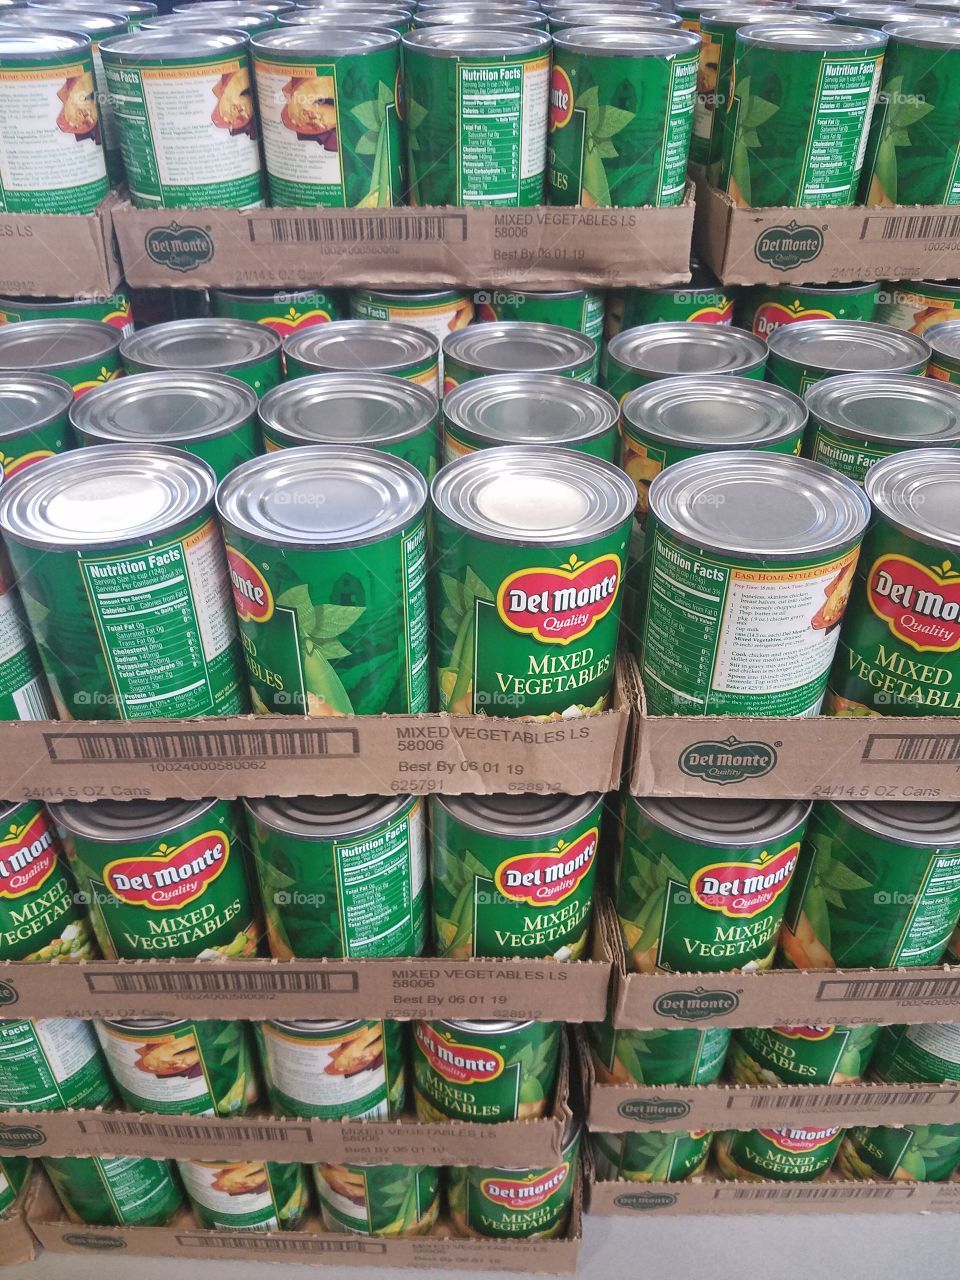 Pallets of green Del Monte mixed vegetable cans